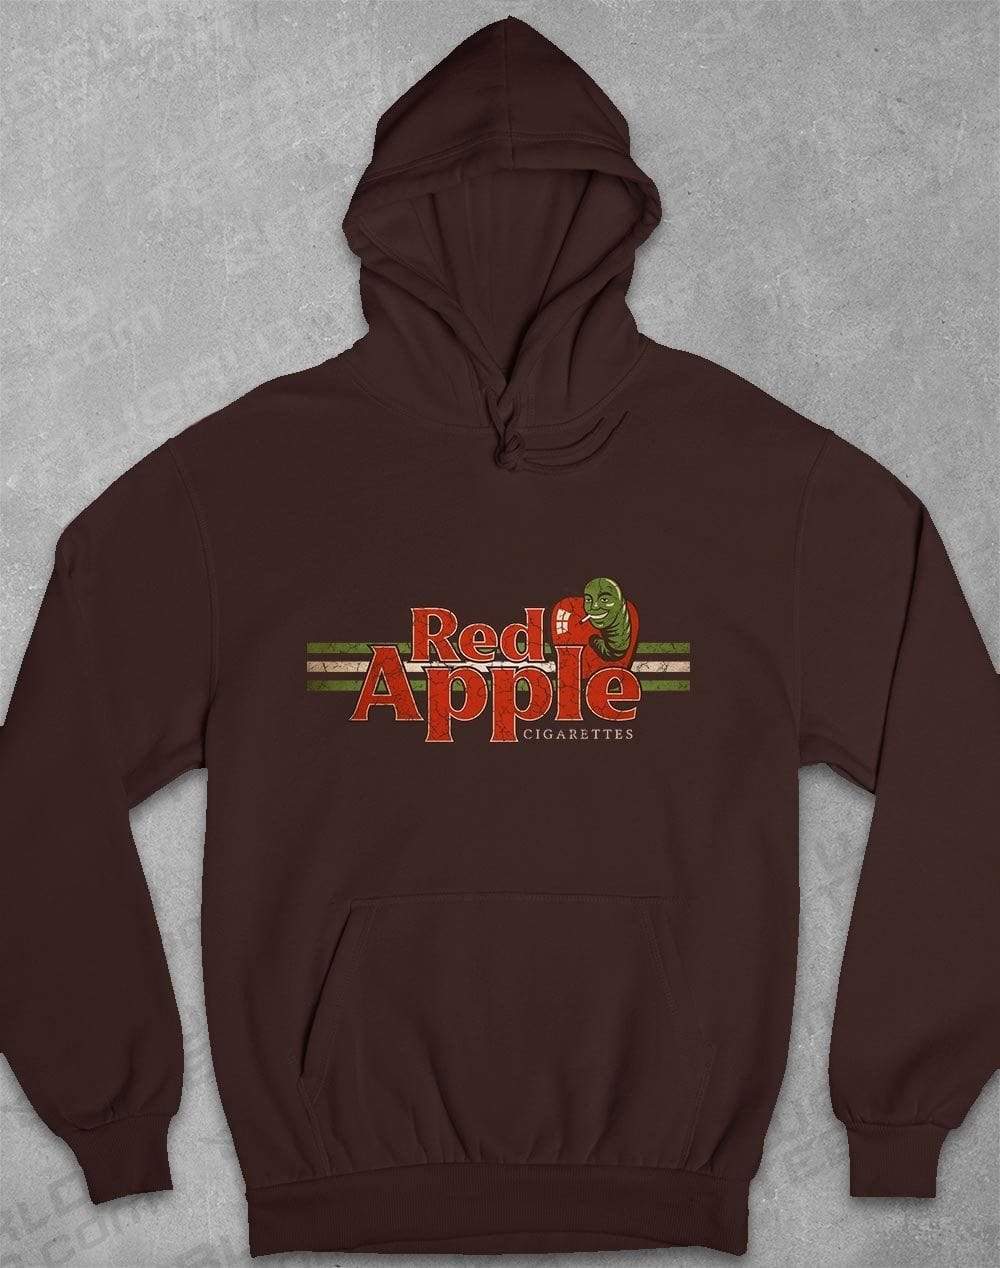 Red Apple Cigarettes Hoodie S / Hot Chocolate  - Off World Tees